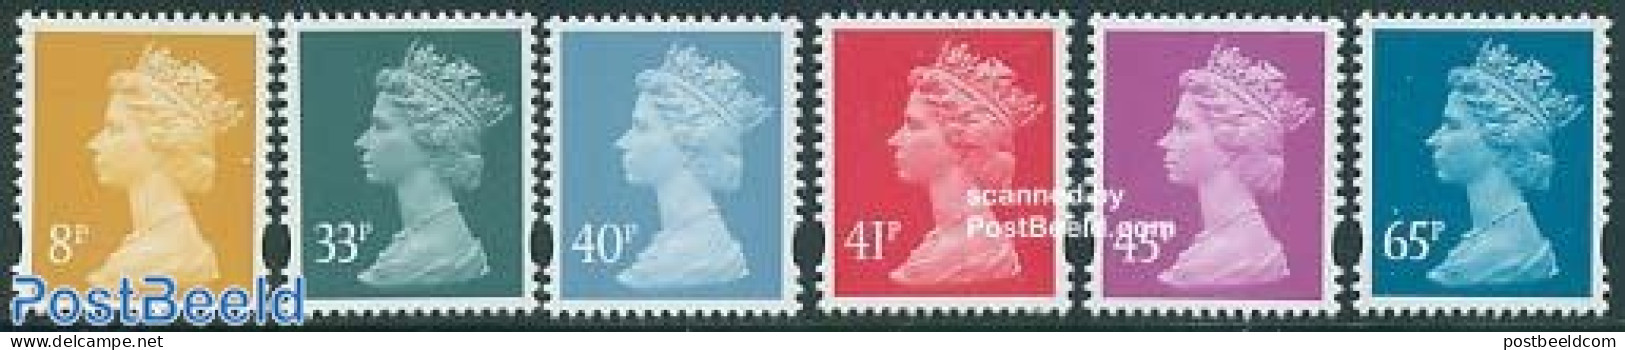 Great Britain 2000 Definitives 6v, Mint NH - Unused Stamps